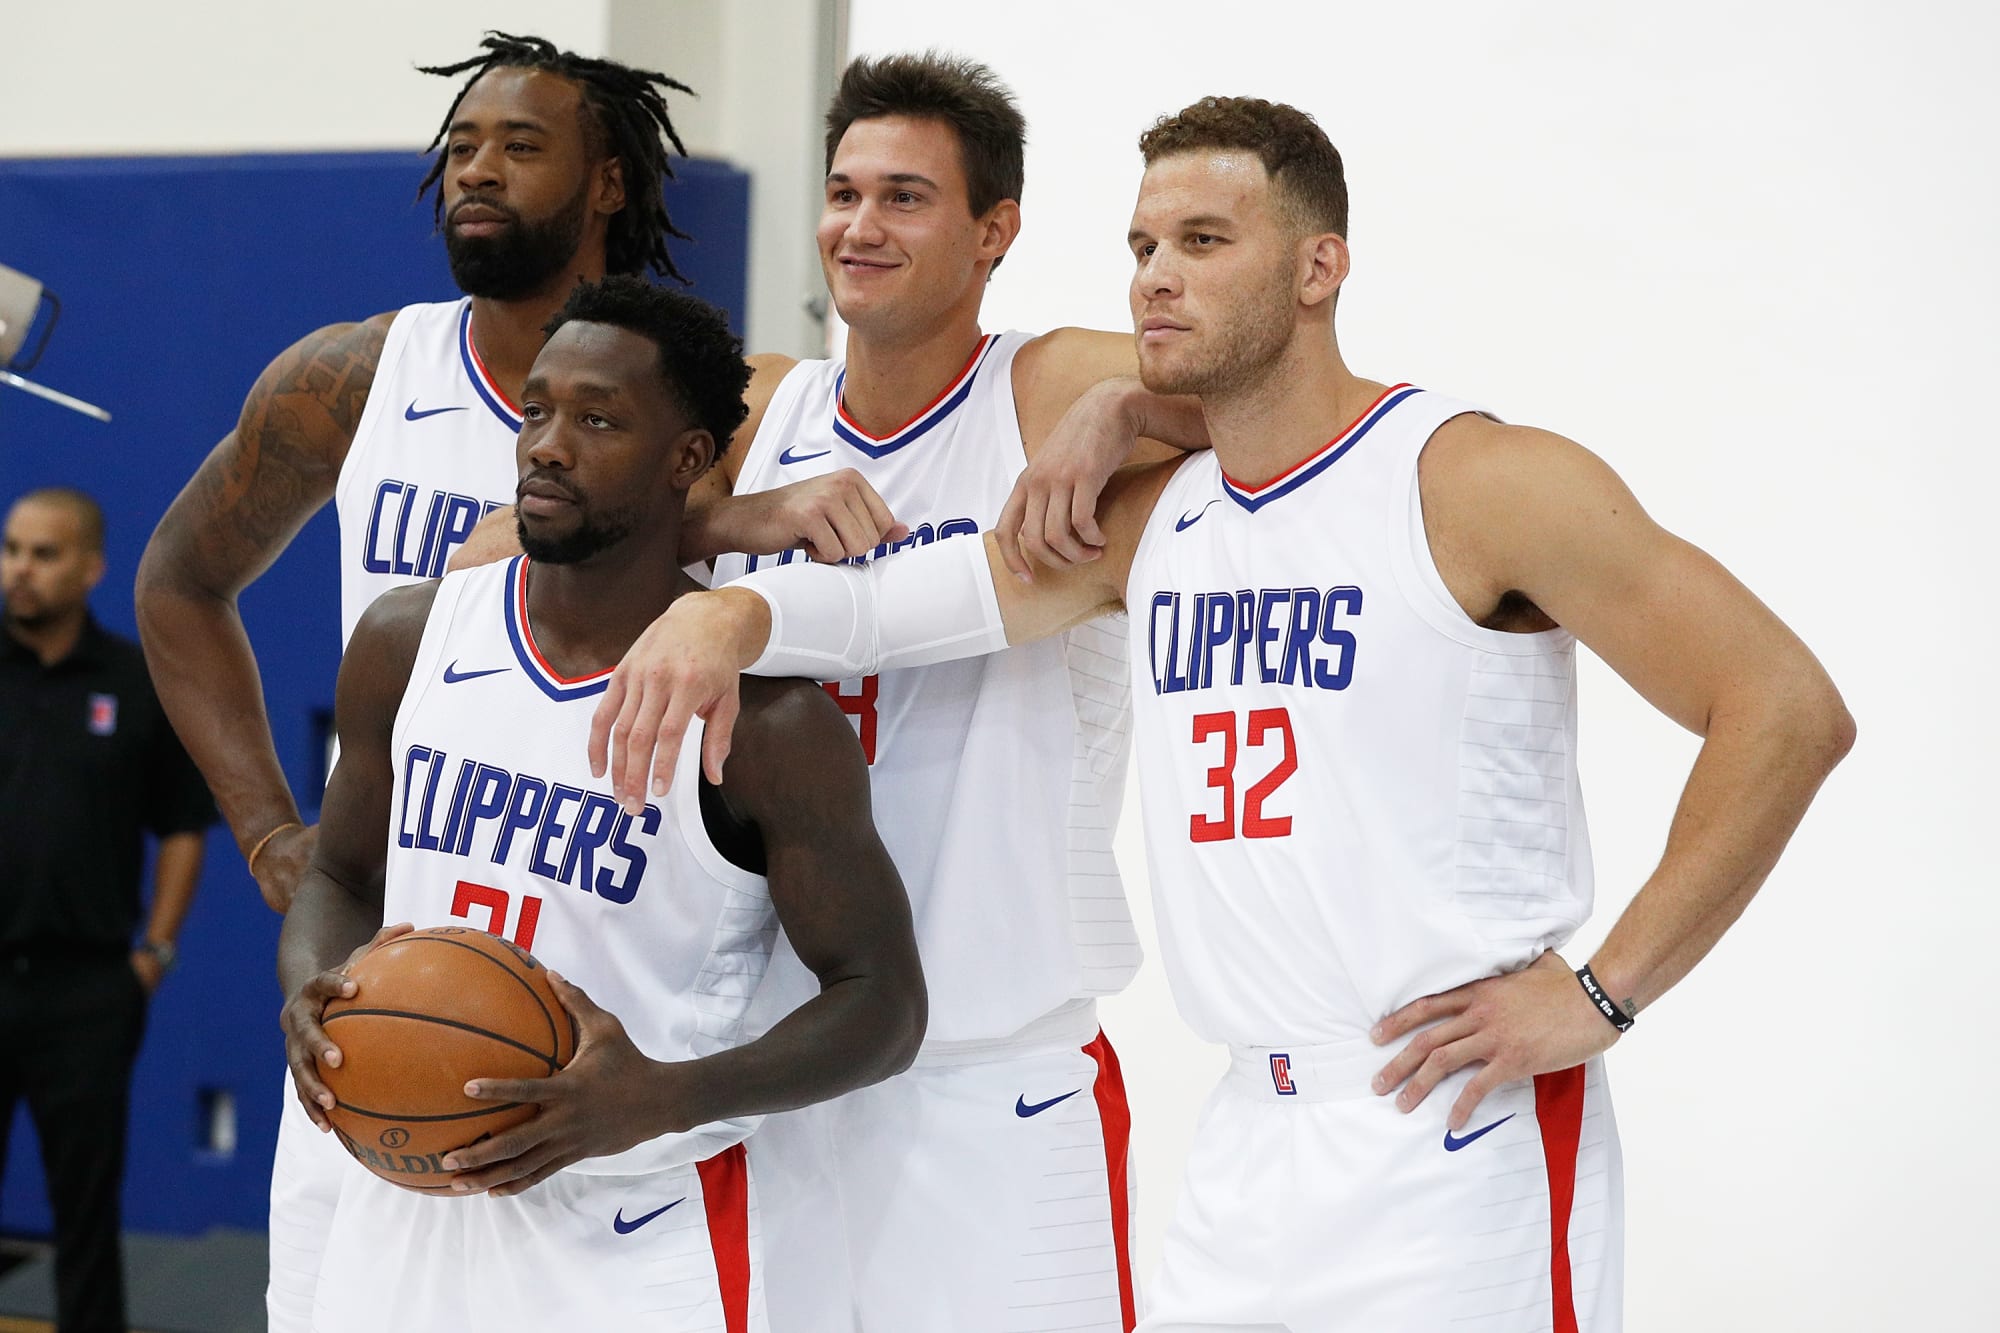 LA Clippers Sights and sounds of training camp opening day